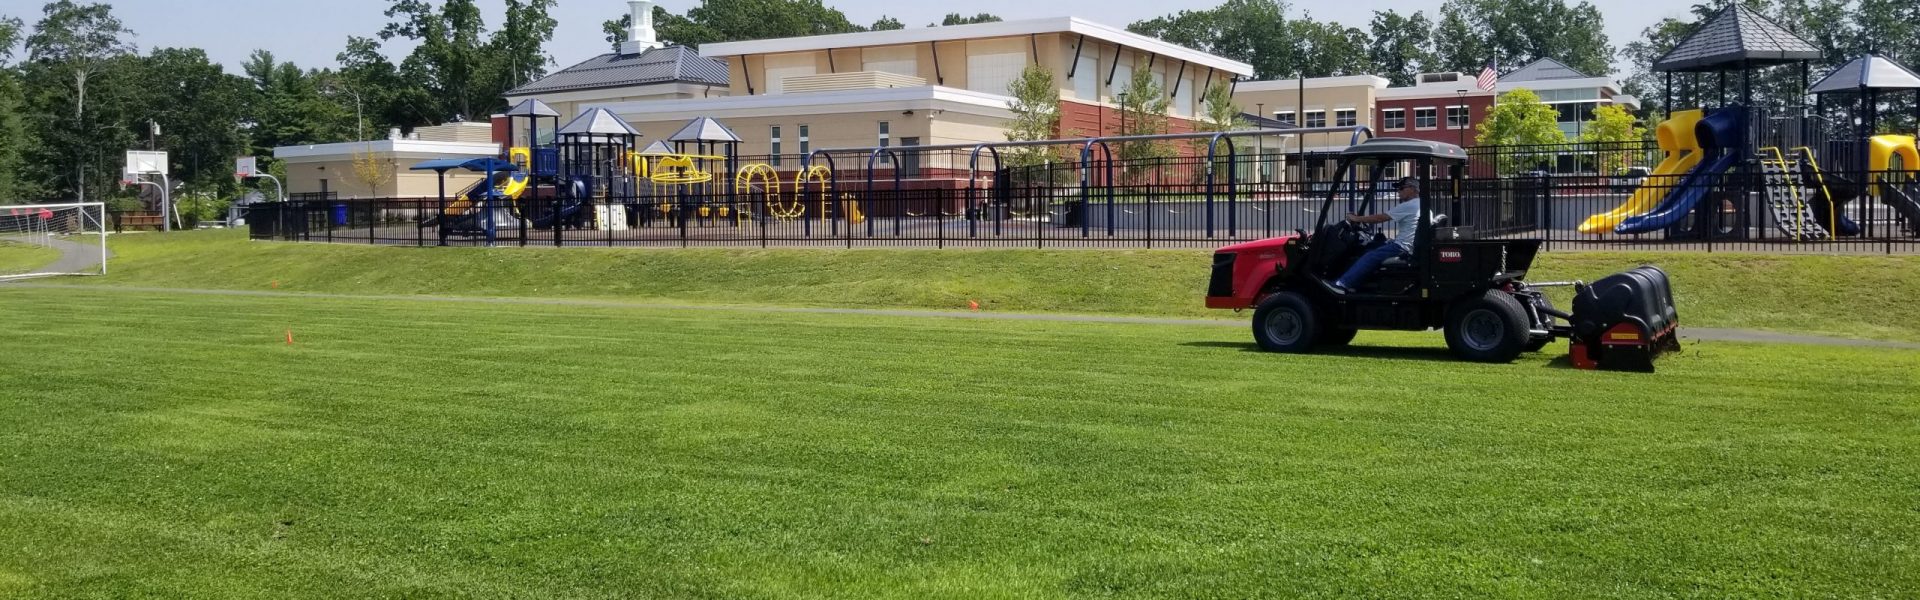 athletic fields on school grounds with tractor